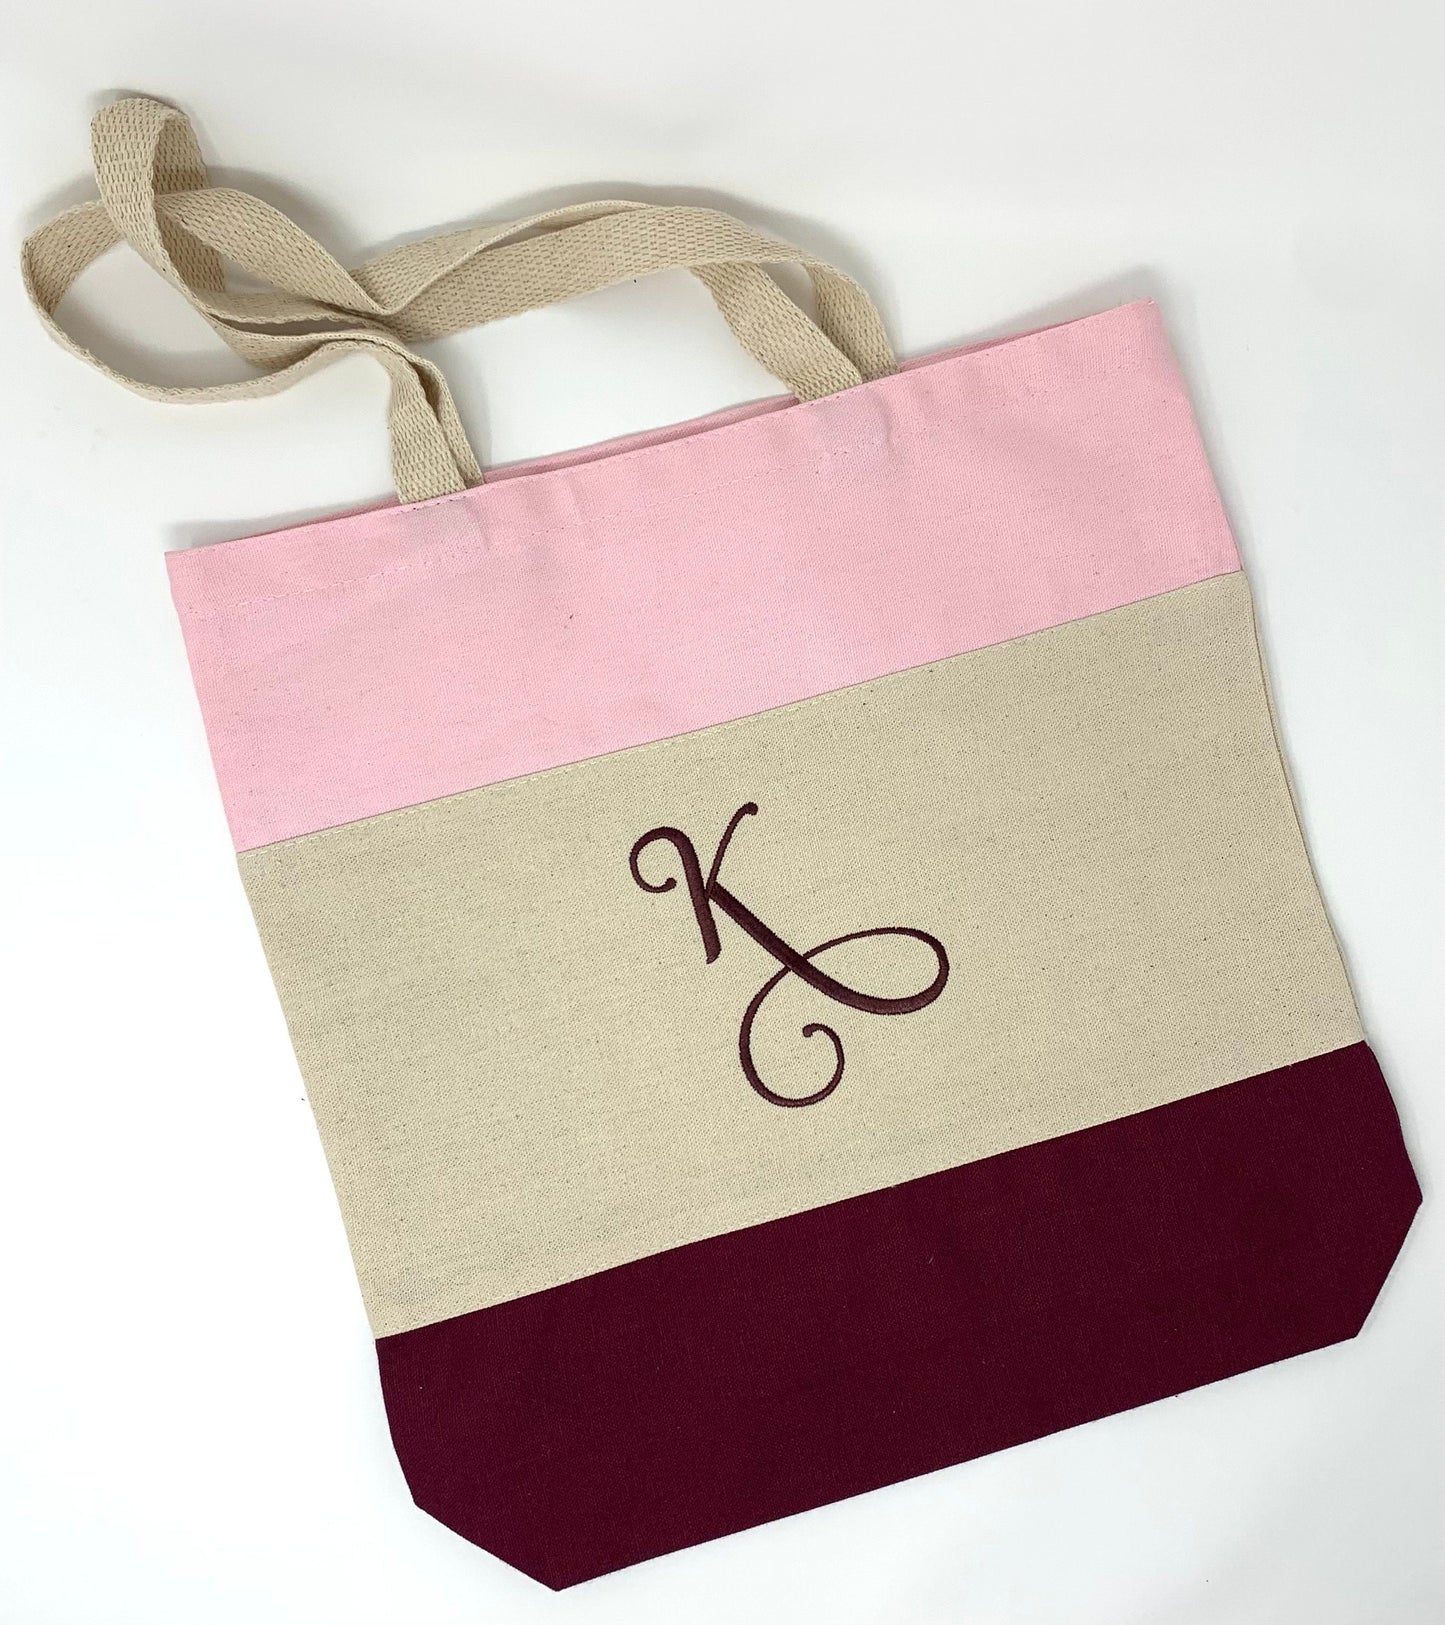 Tote Bag, Personalized, Canvas Tote, Beach Bag, Grocery Bag, Embroidered Initial